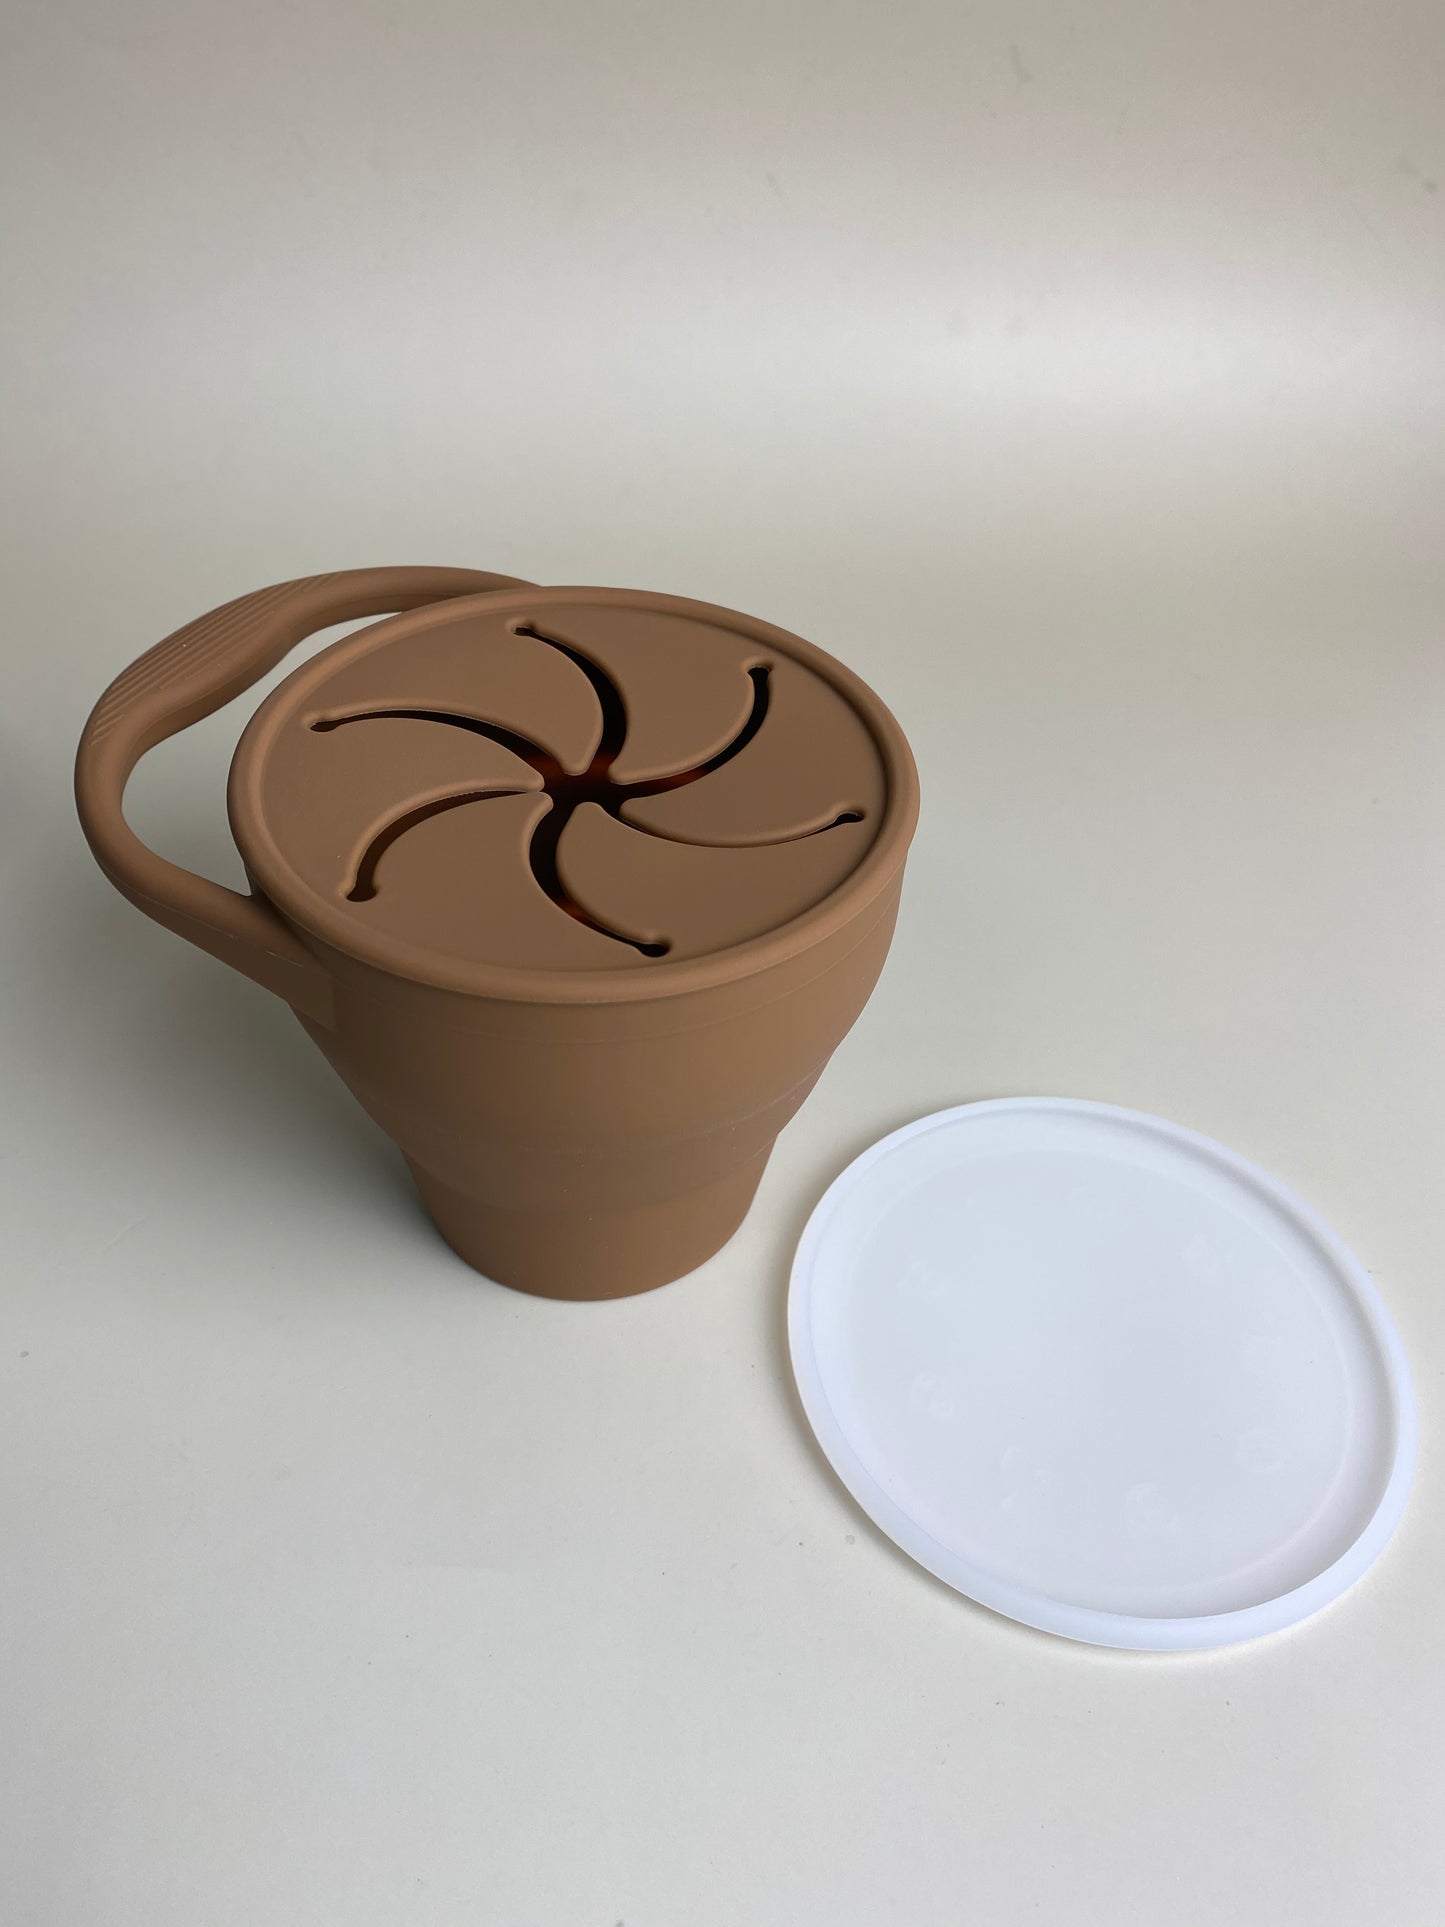 Silicone Collapsible Snack Cup